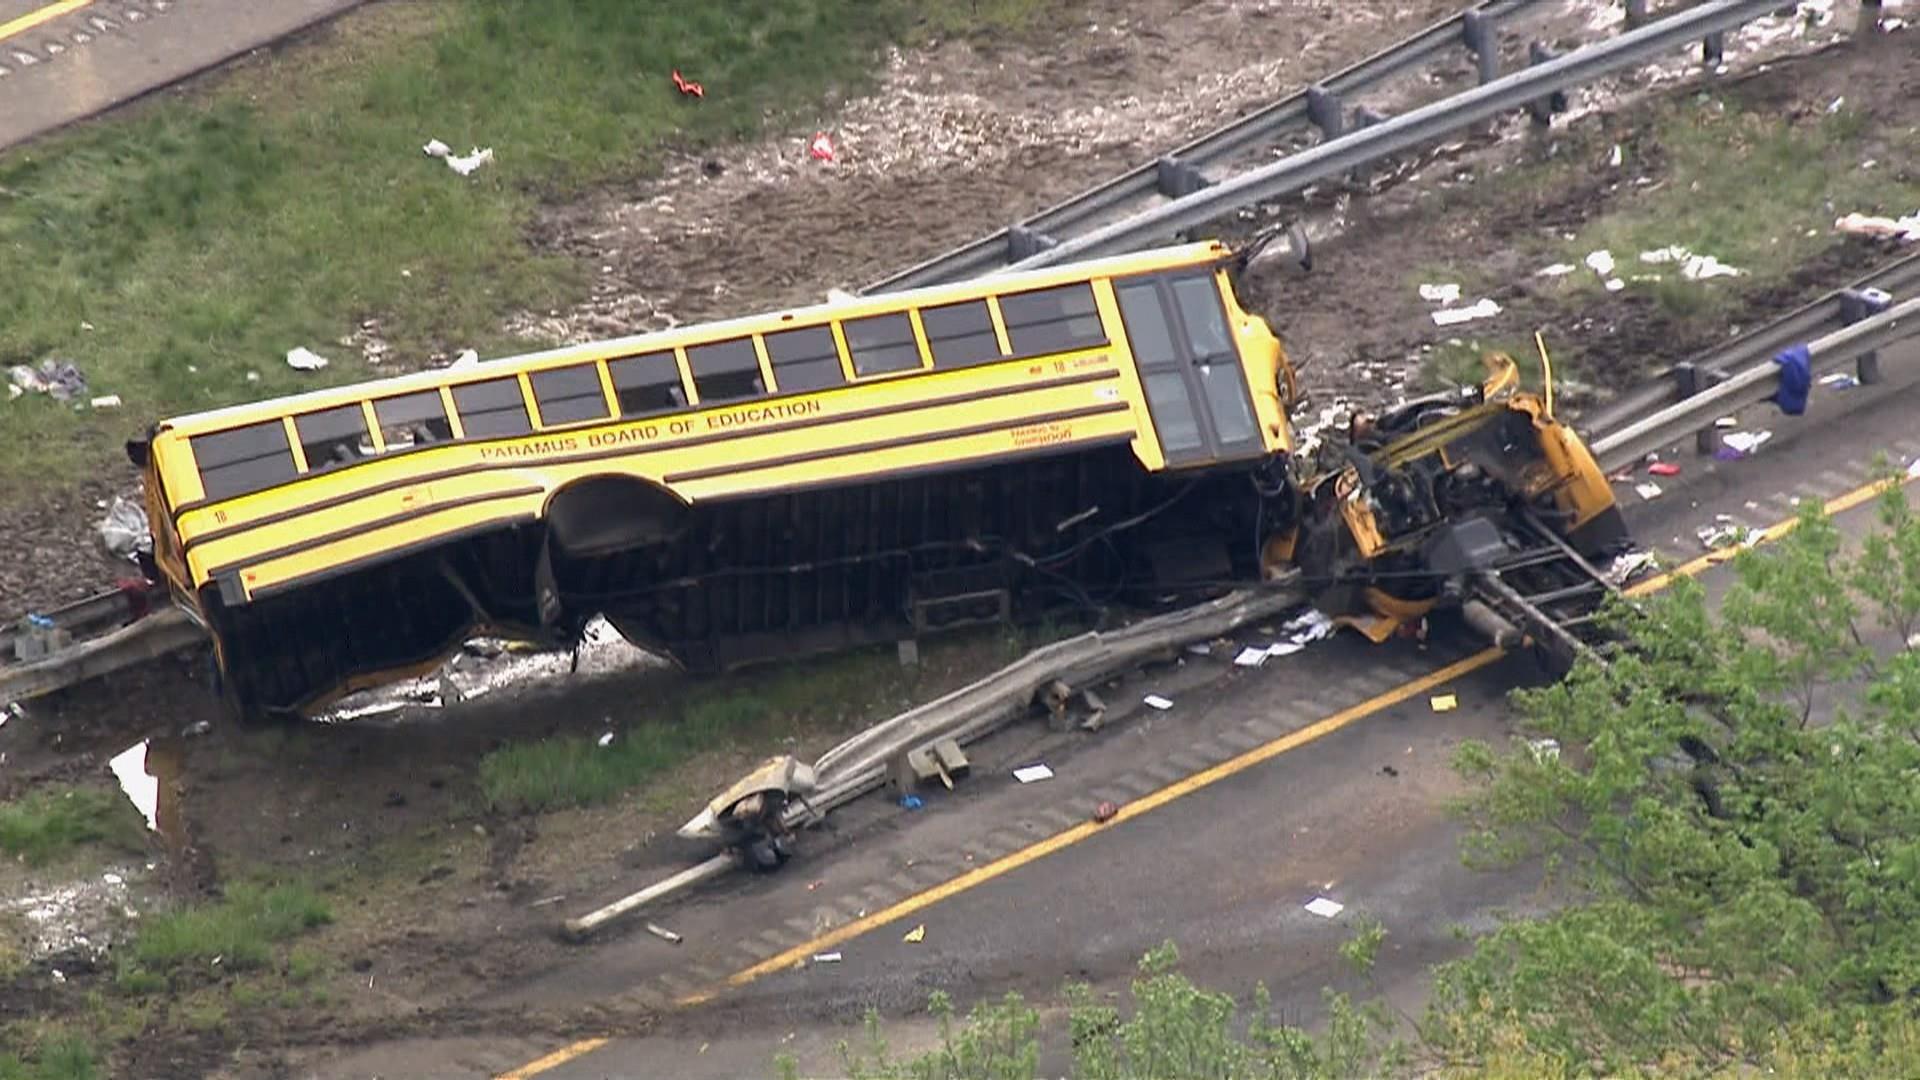 All new school buses should have seat belts, officials say